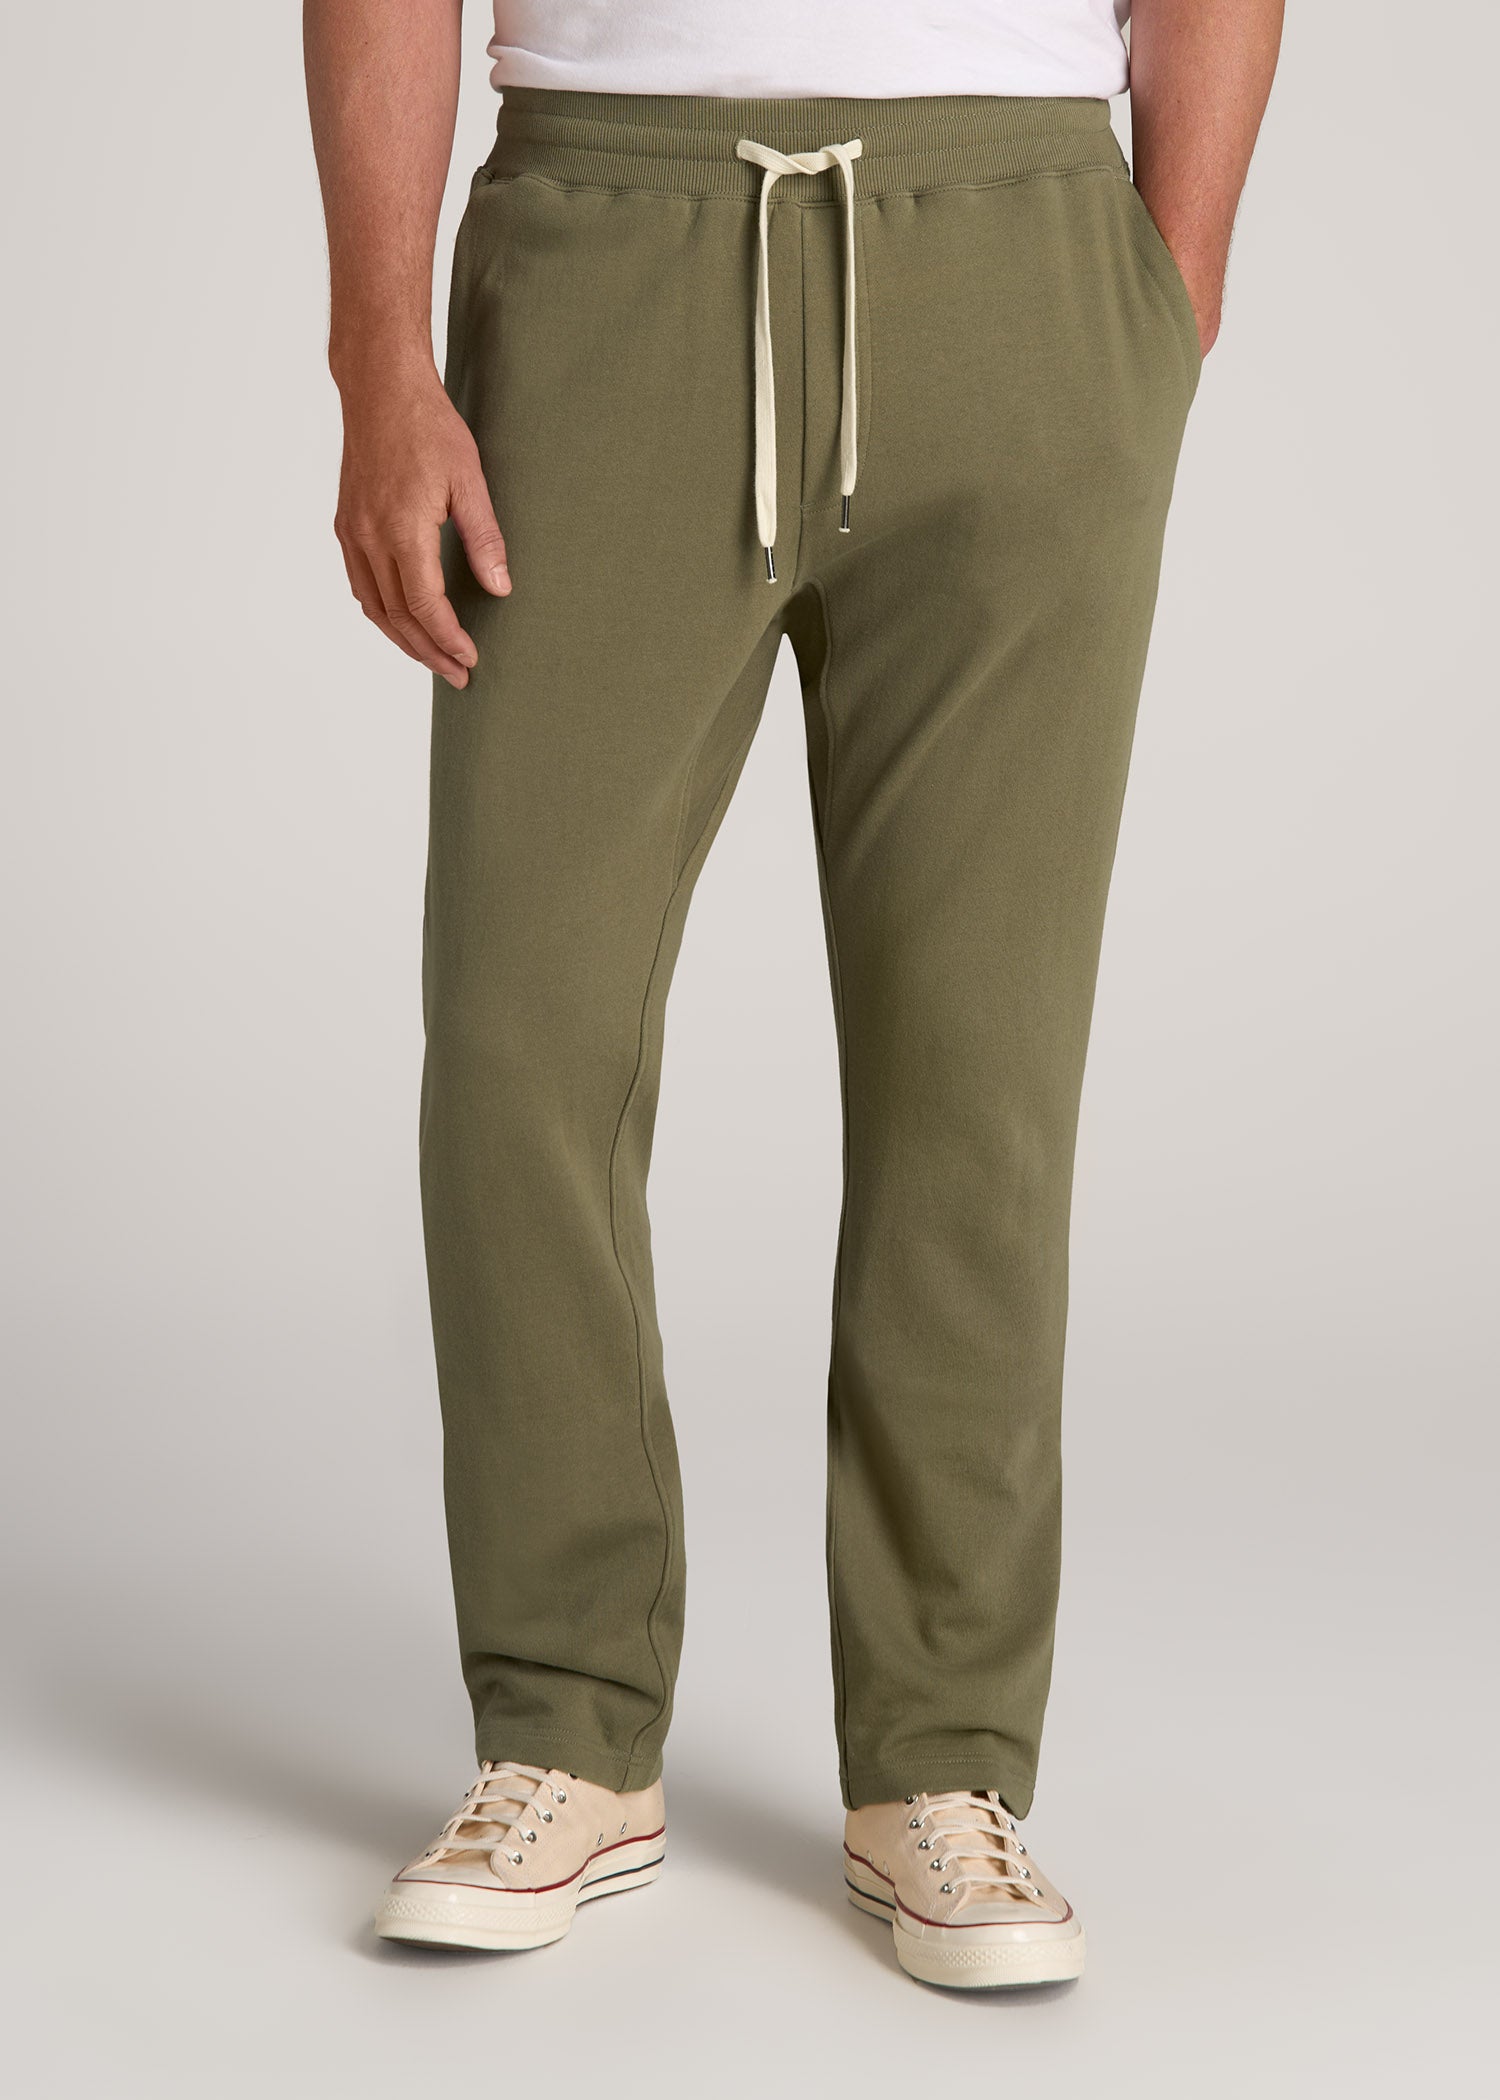 Old Navy Adjustable Waist Athletic Sweat Pants for Men